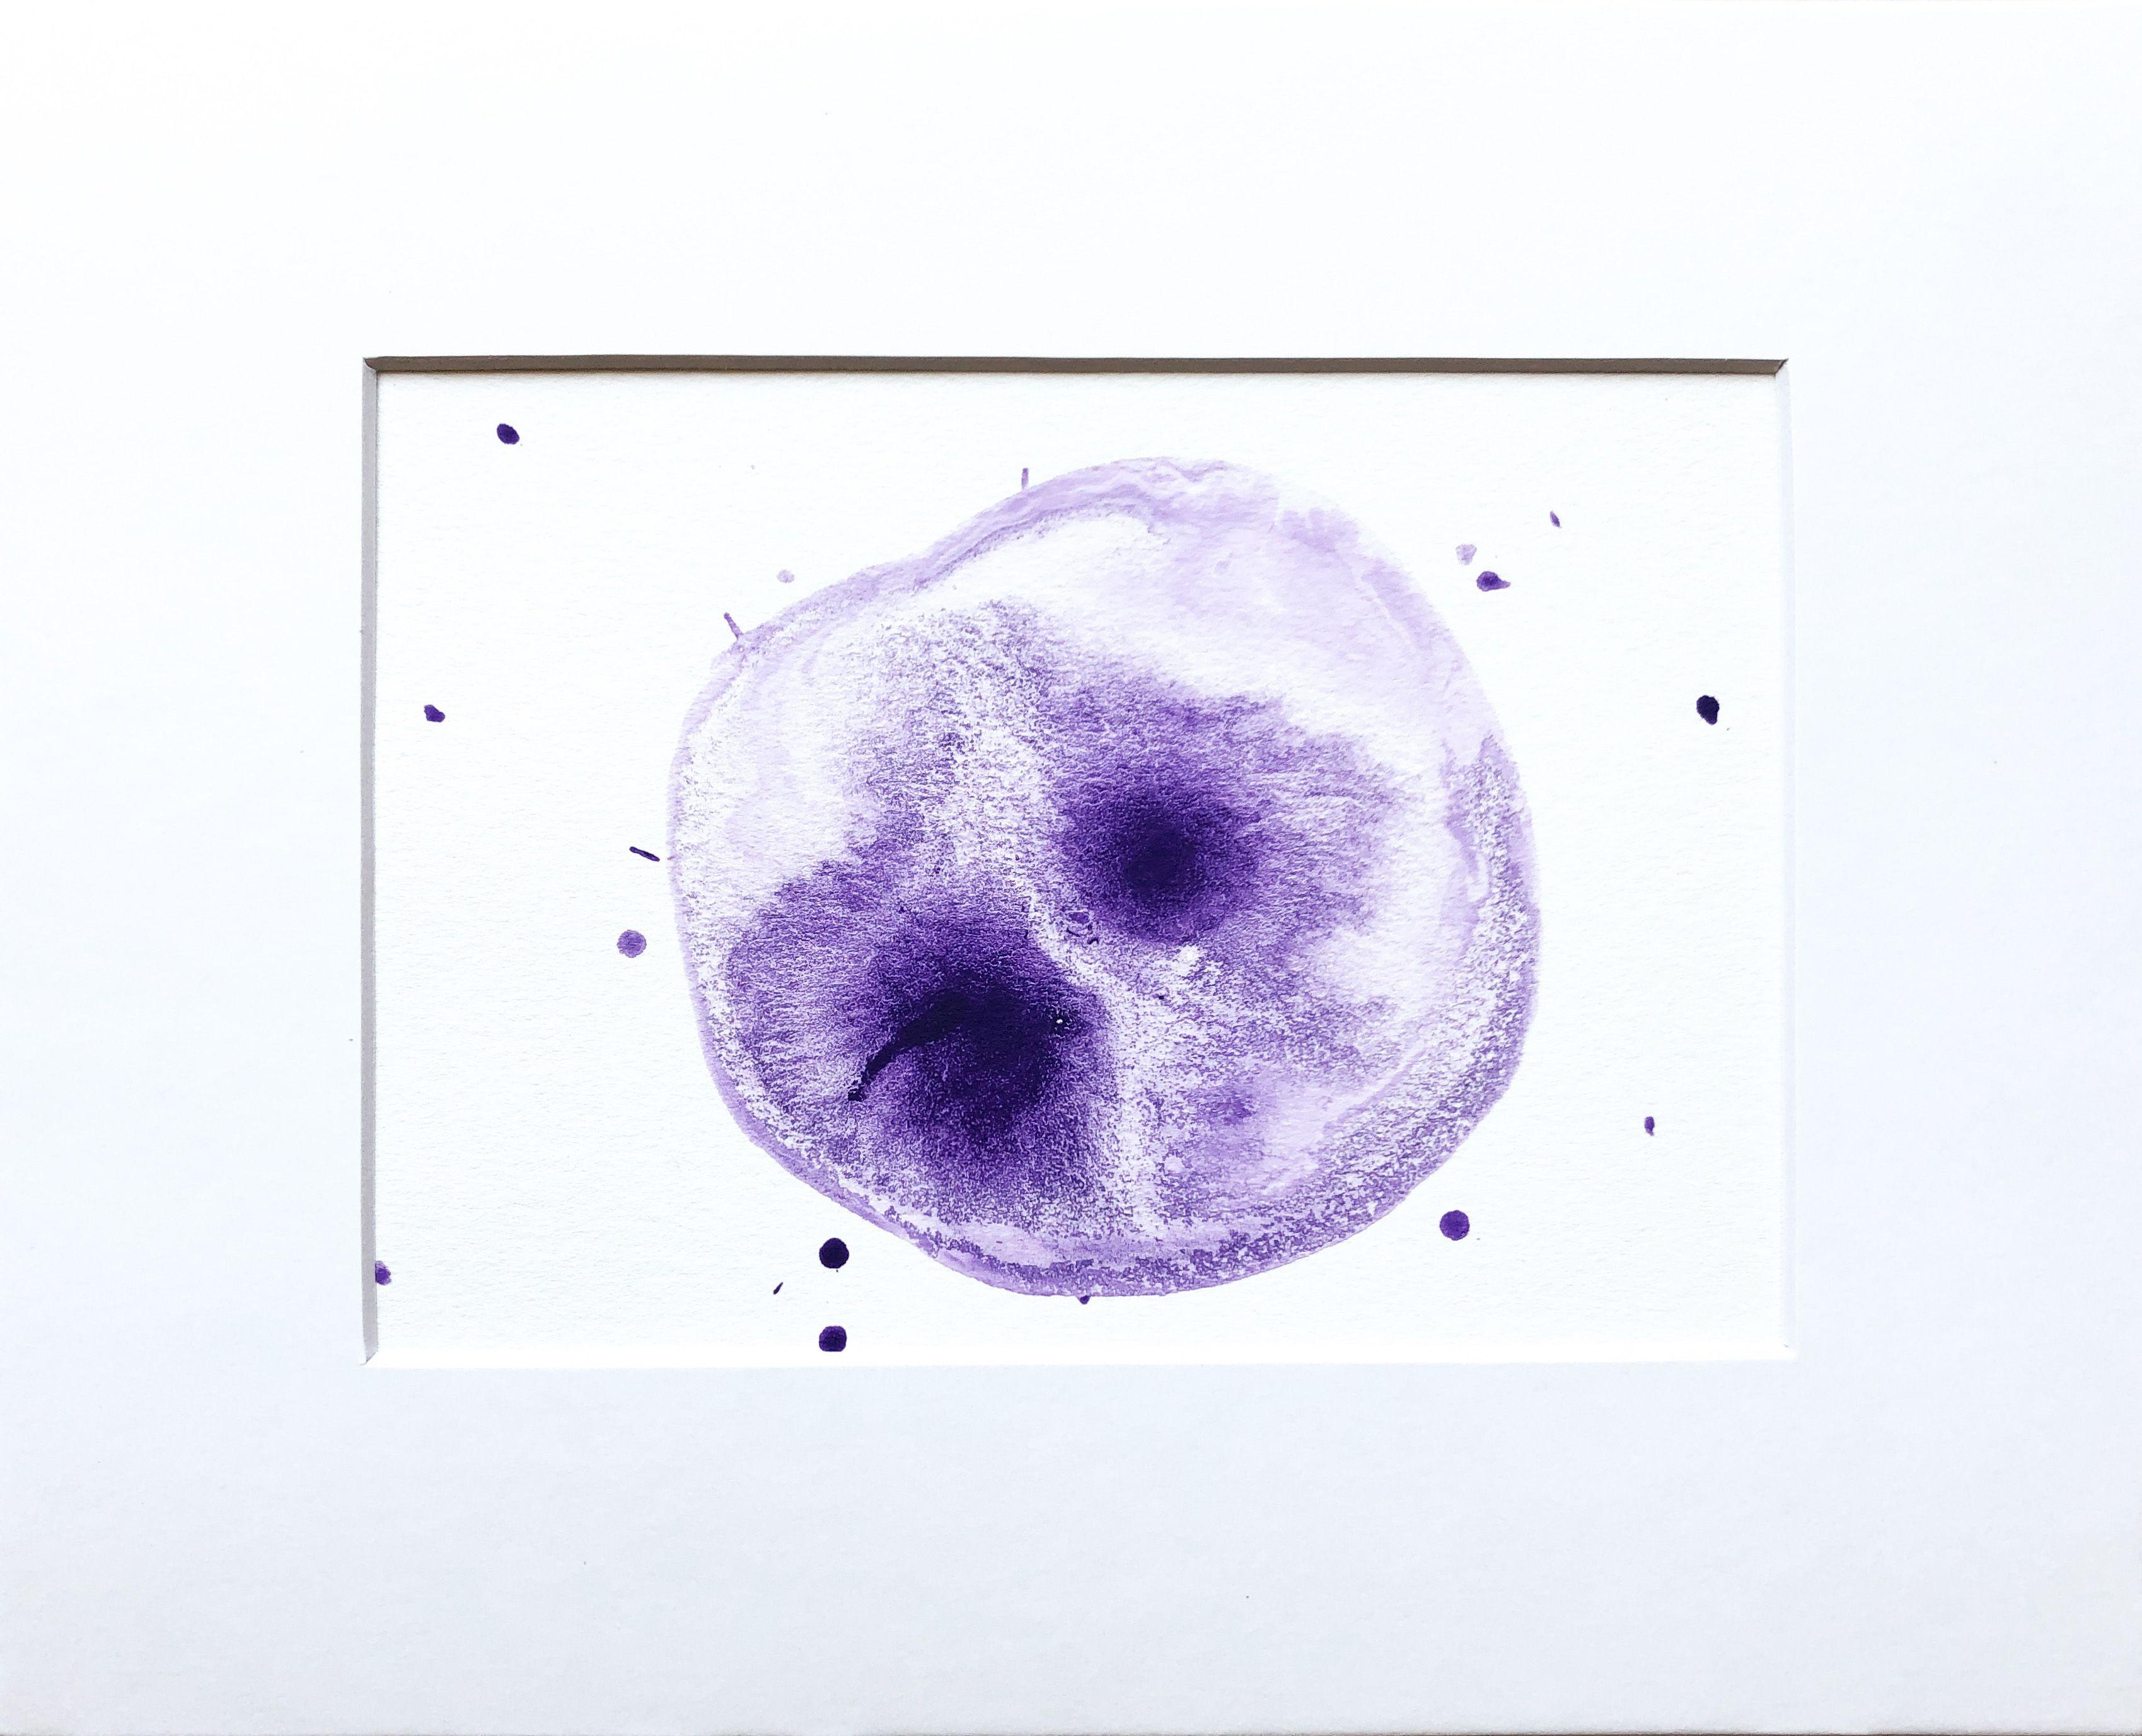 Purple Nebula 2 was created with acrylics, saltwater and a bit of magic. Saltwater causes the pigments to explode onto the watercolor bond. The results are intriguing and serendipitous. This small piece will add a pop of graphic modernity to your